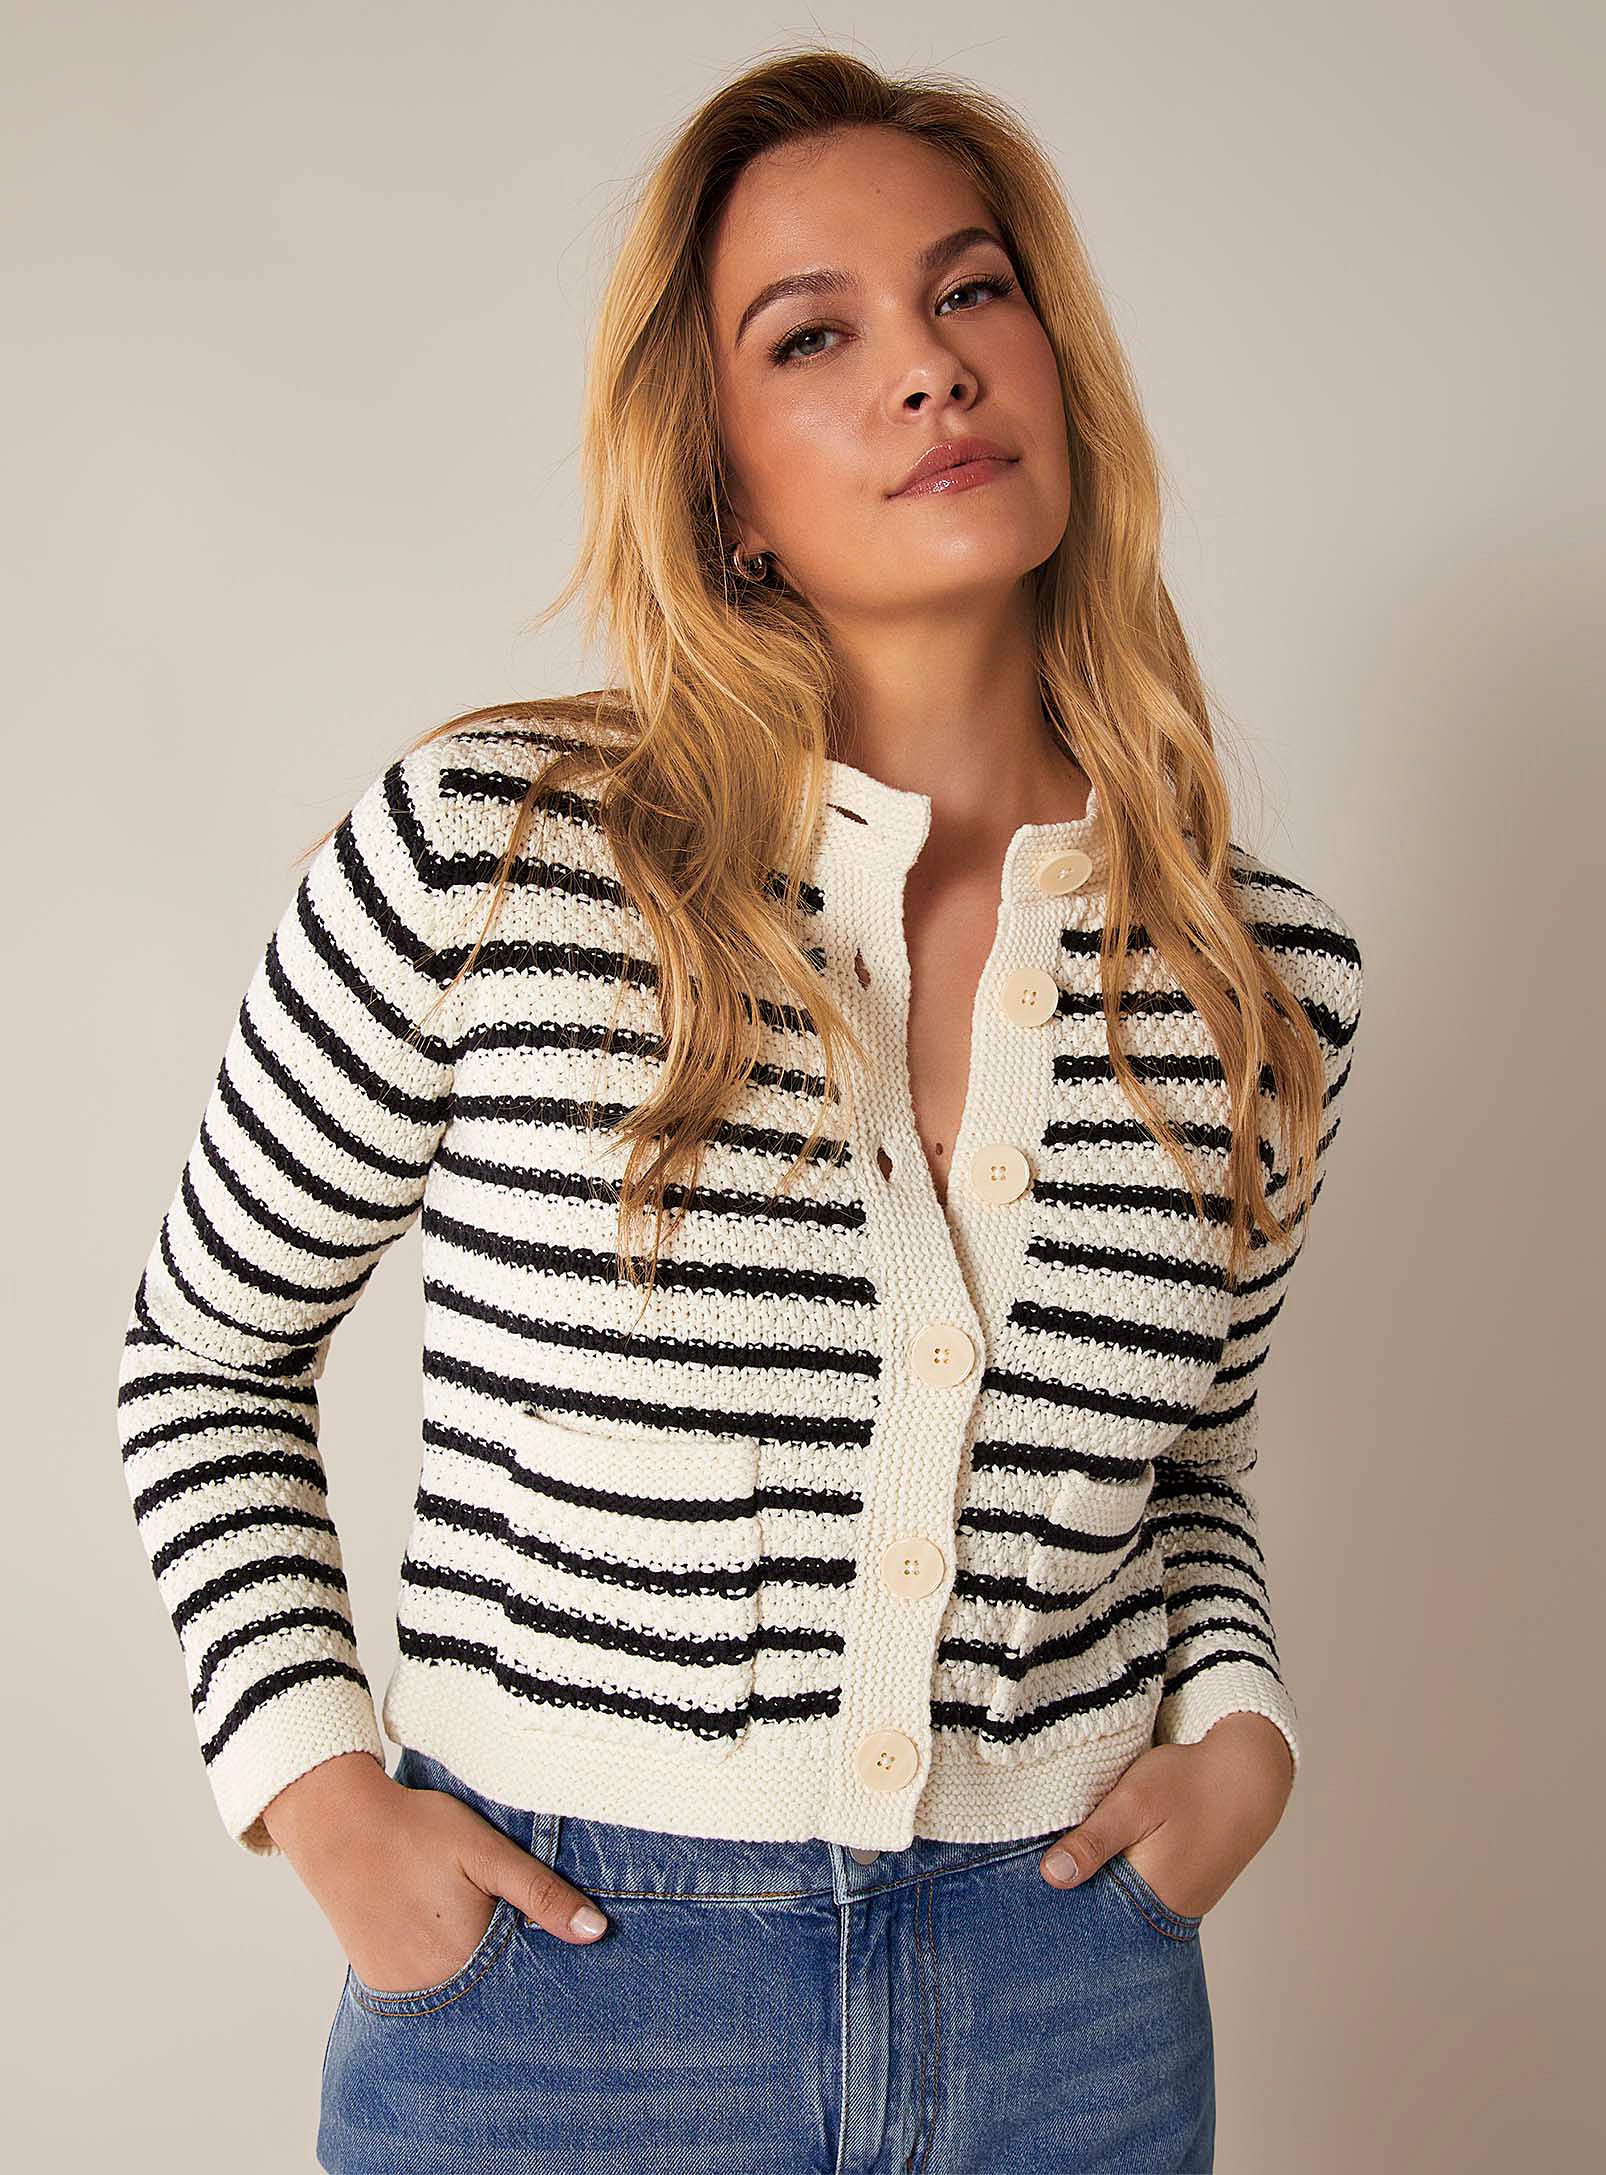 Part Two - Women's Elmie contrasting stripes textured Cardigan Sweater